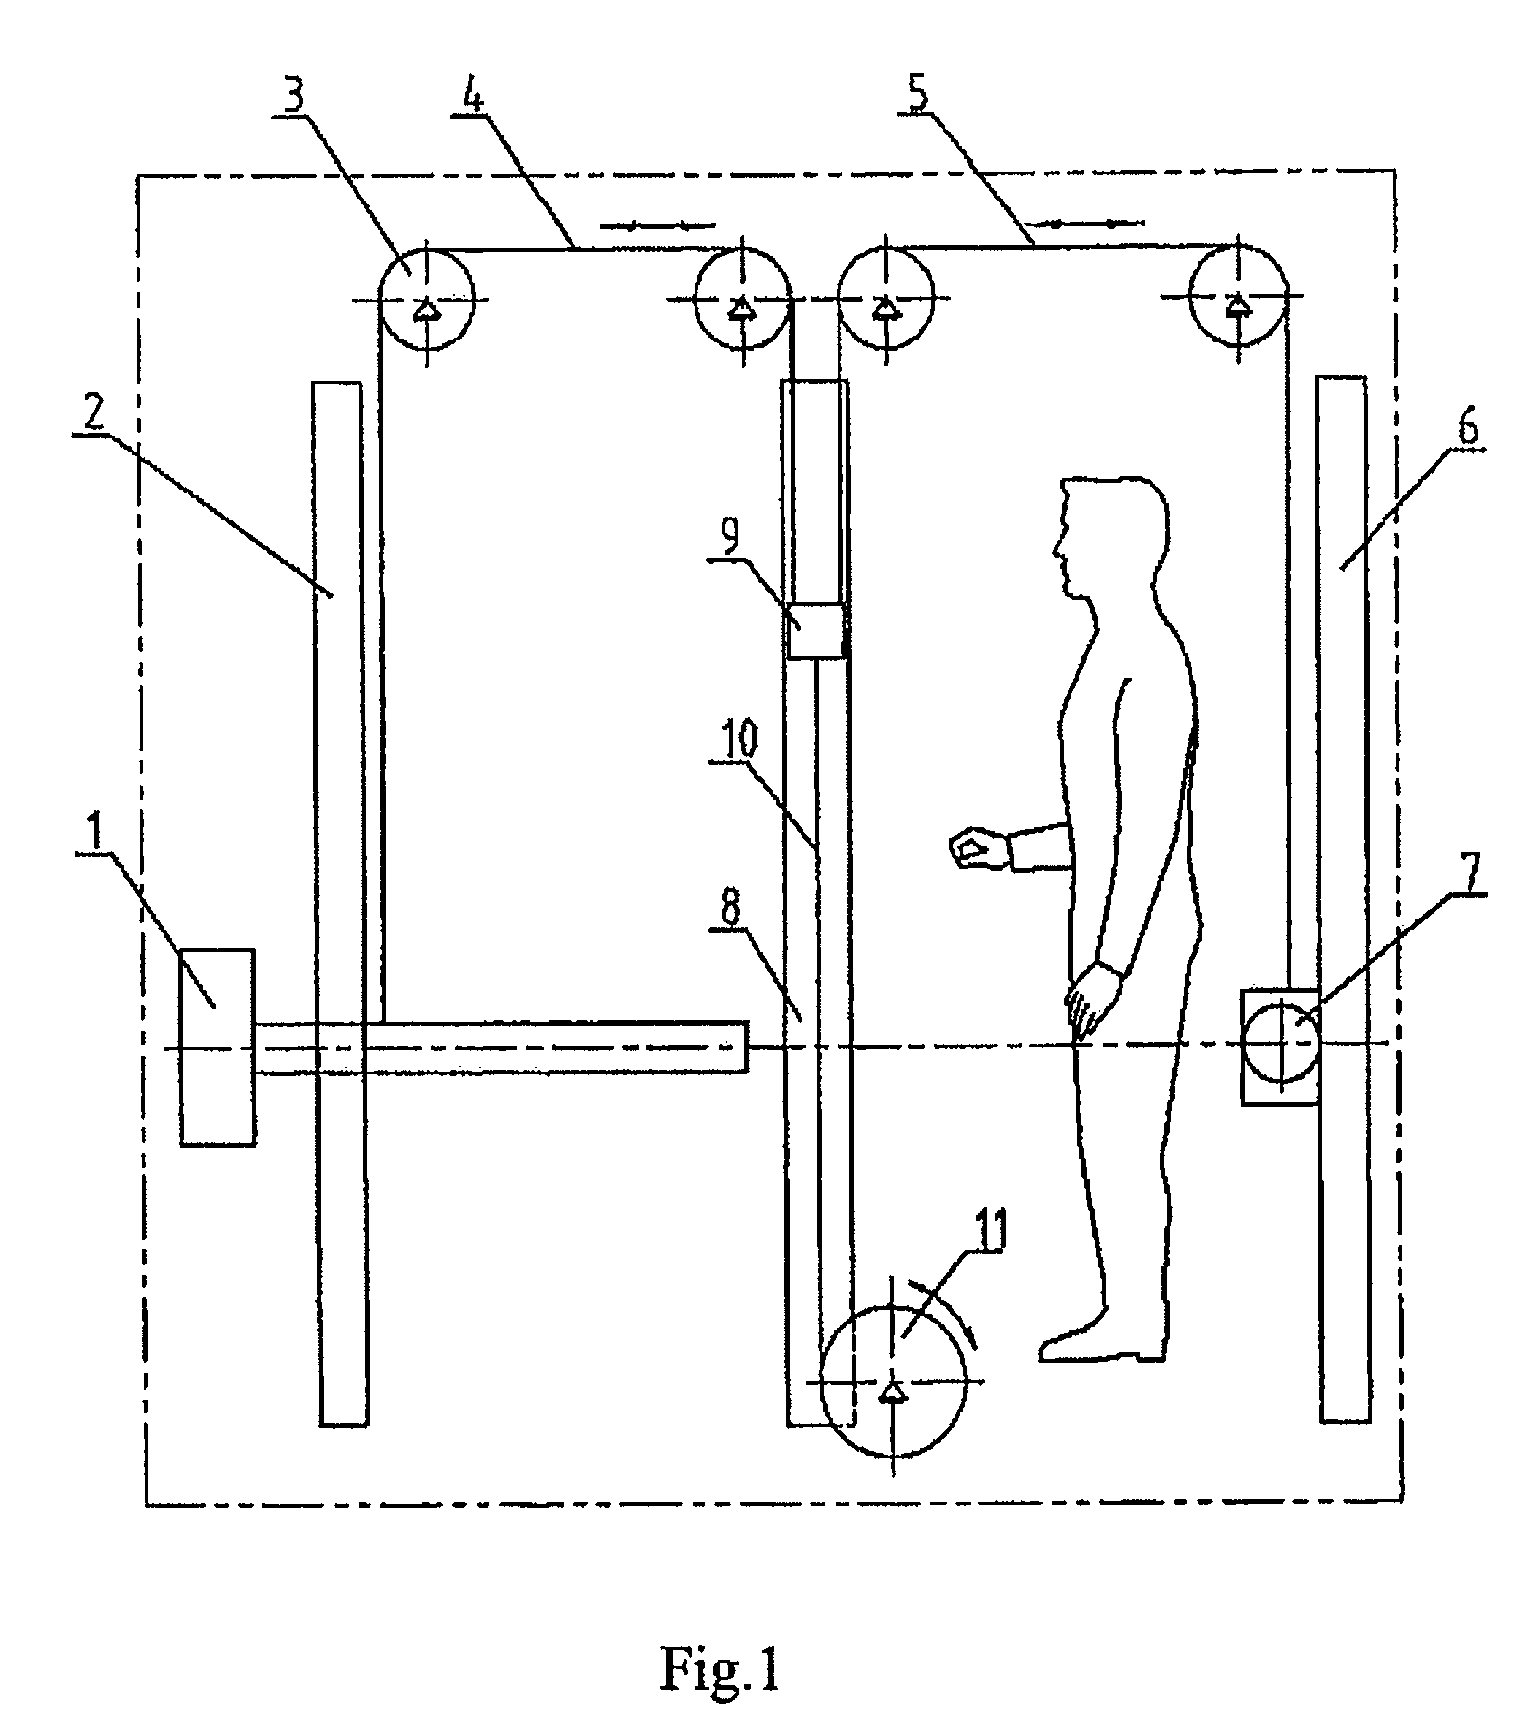 Radiation device for human body inspection